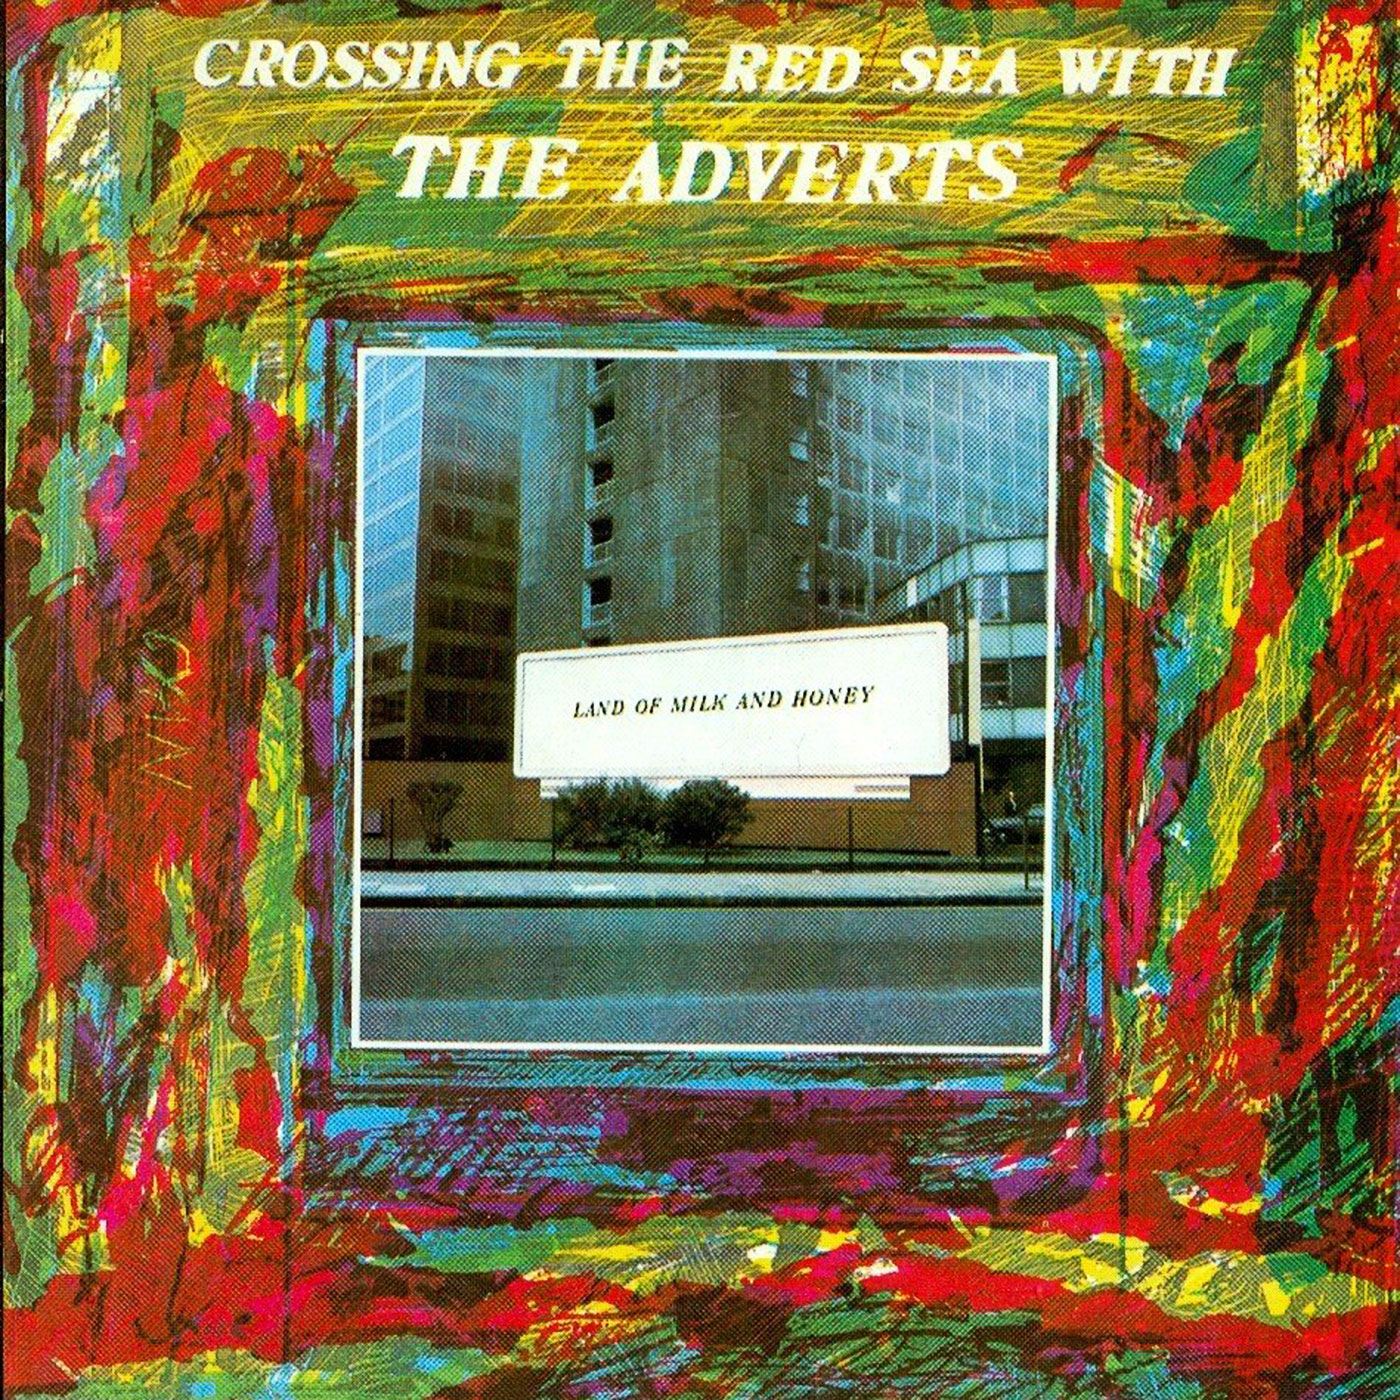 404 The Adverts – Crossing the Red Sea With the Adverts